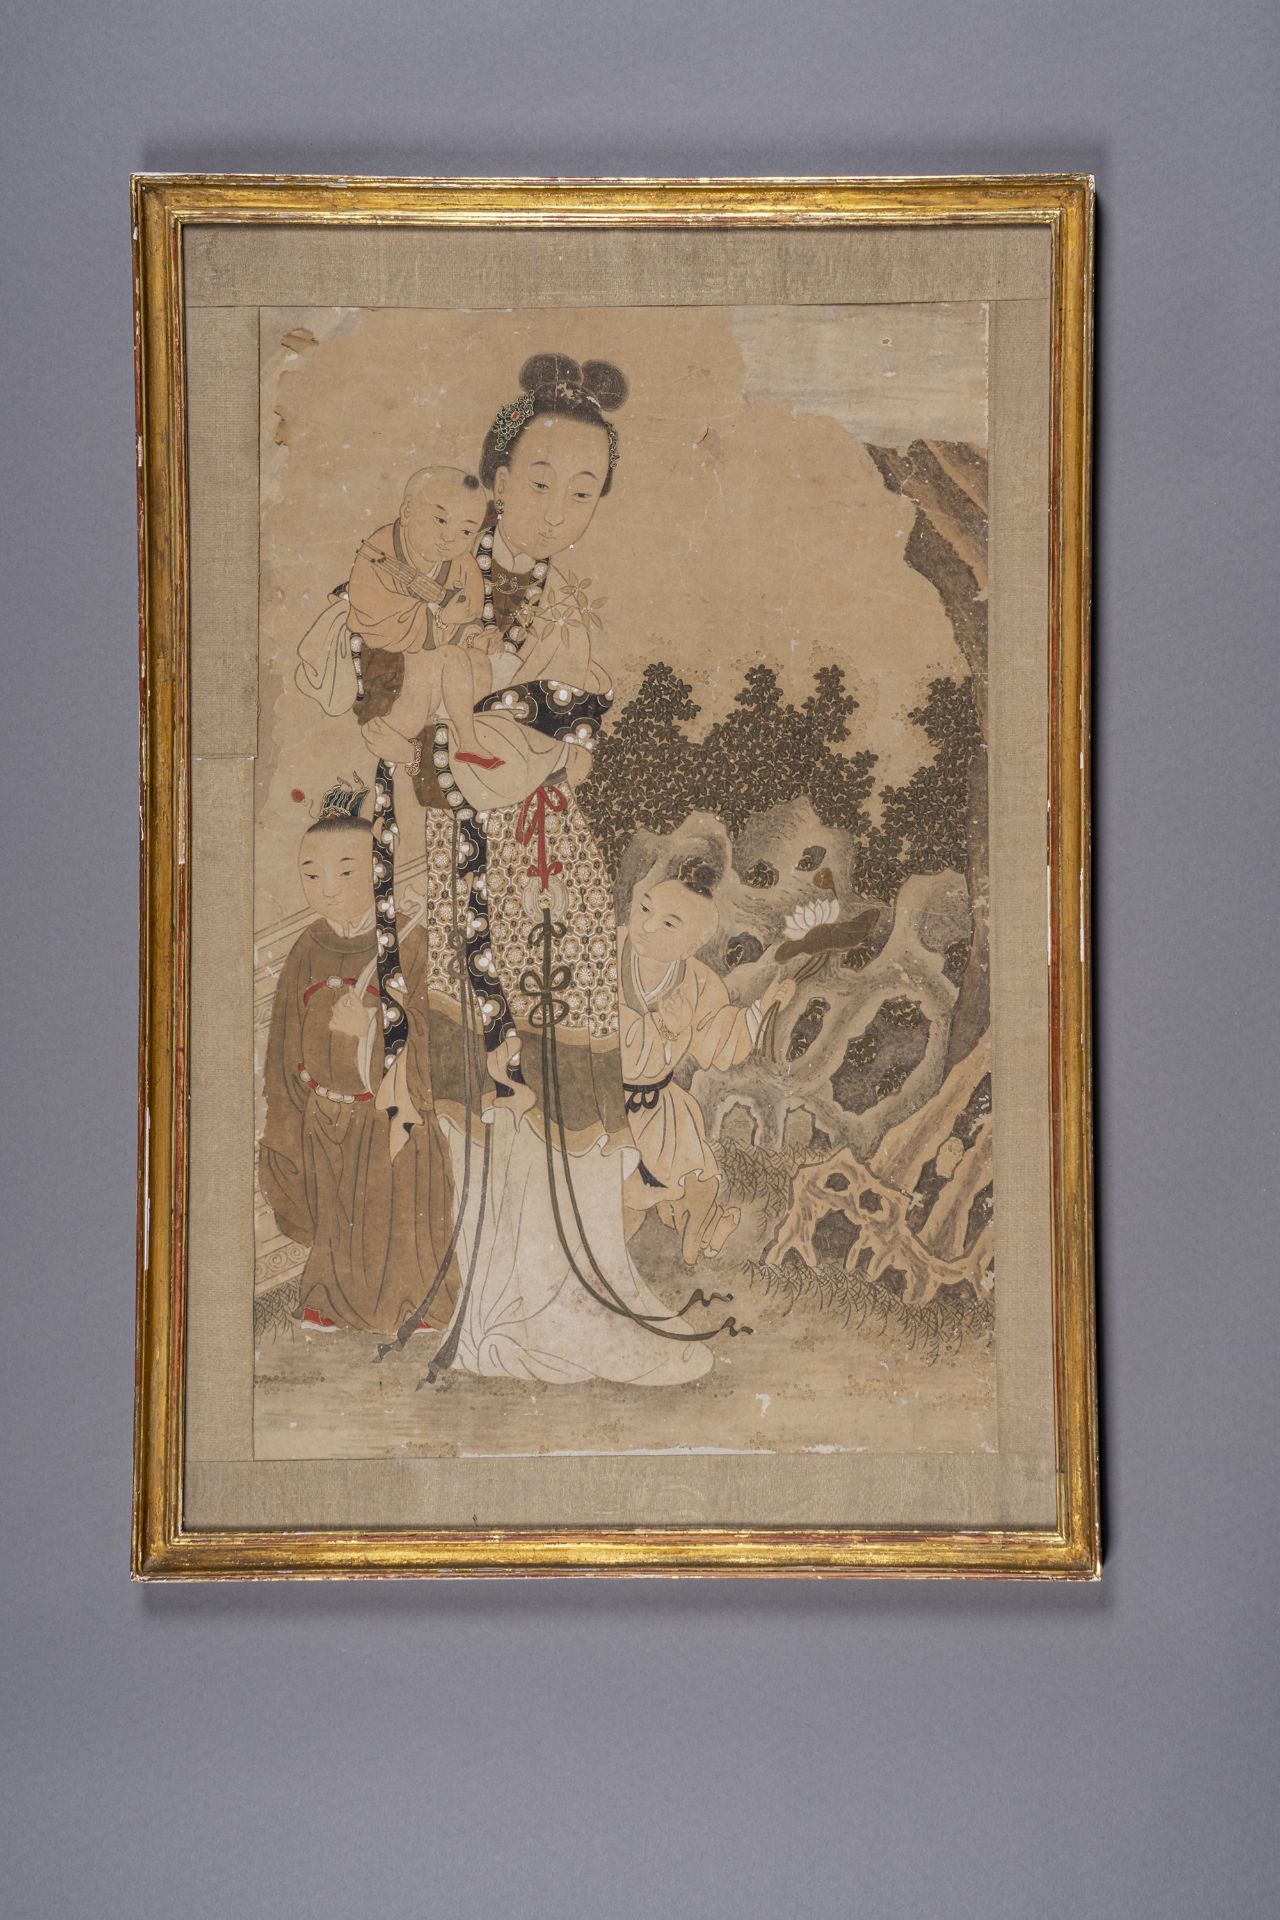 A PAINTING OF ROYALTIES AND IMMORTALS, 18th CENTURY - Image 2 of 3